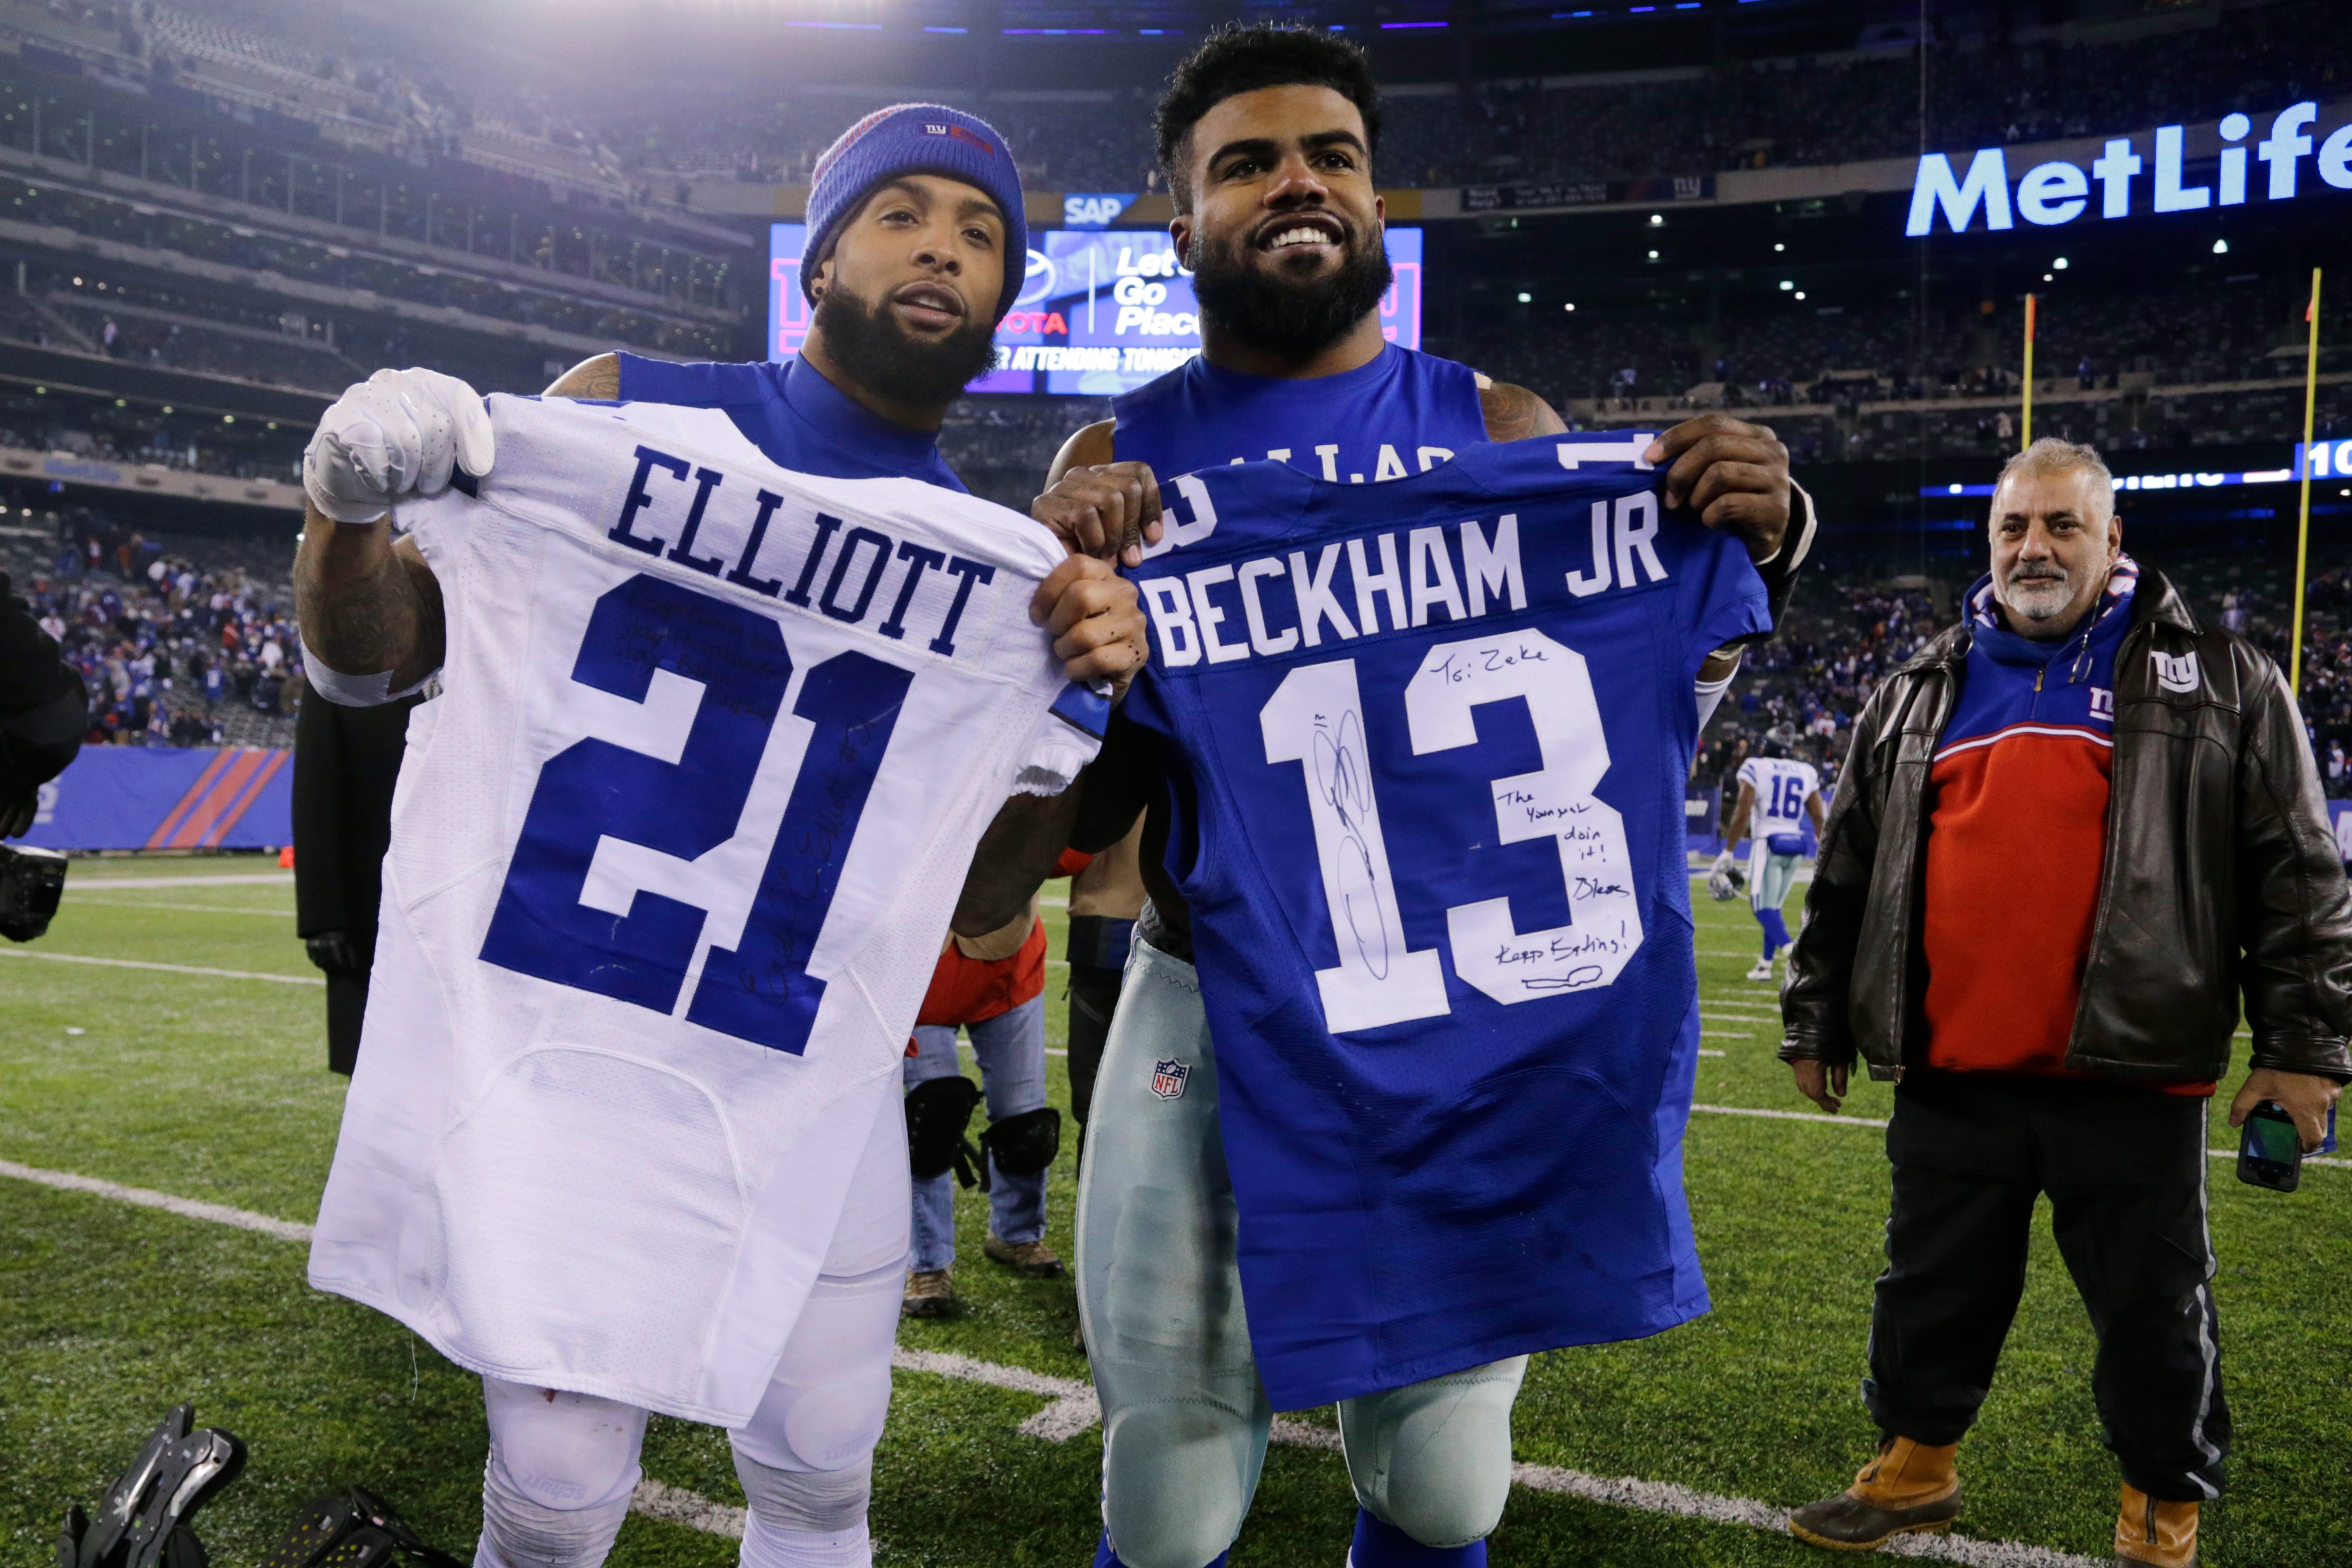 Jersey swap: NFL players share shirts 